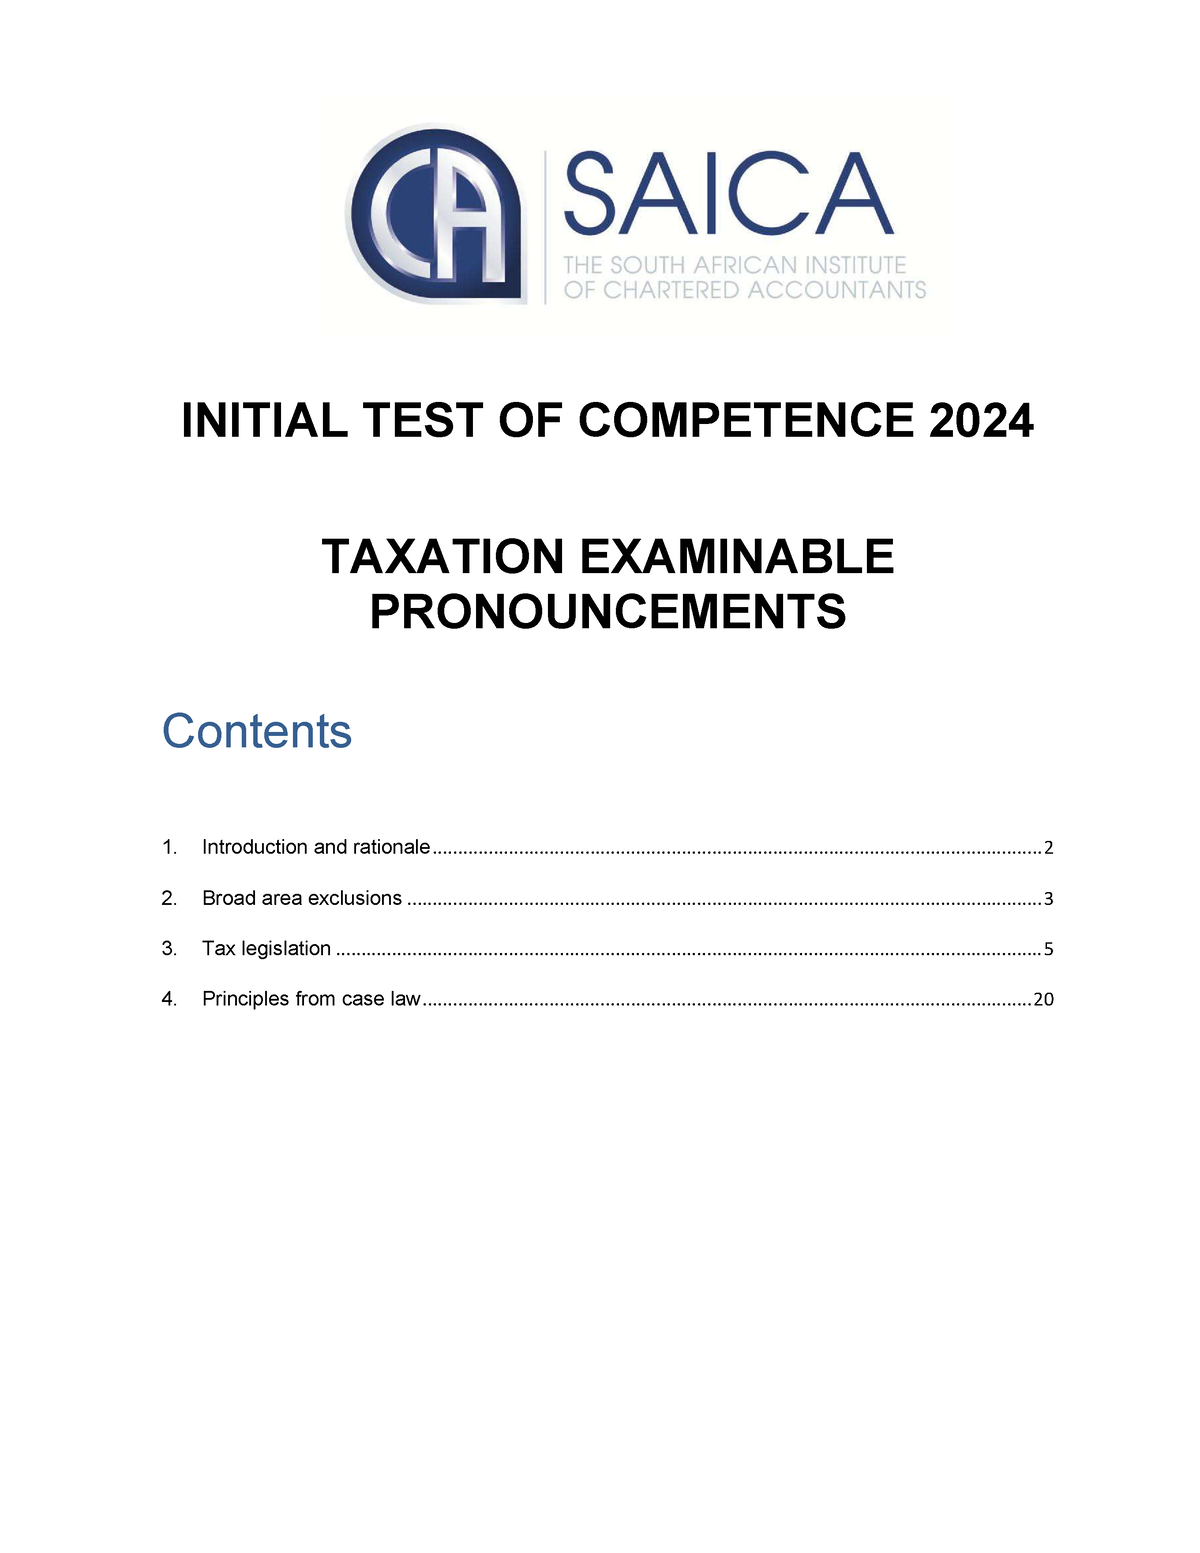 ITC 2024 Tax examinable pronouncements (clean) INITIAL TEST OF